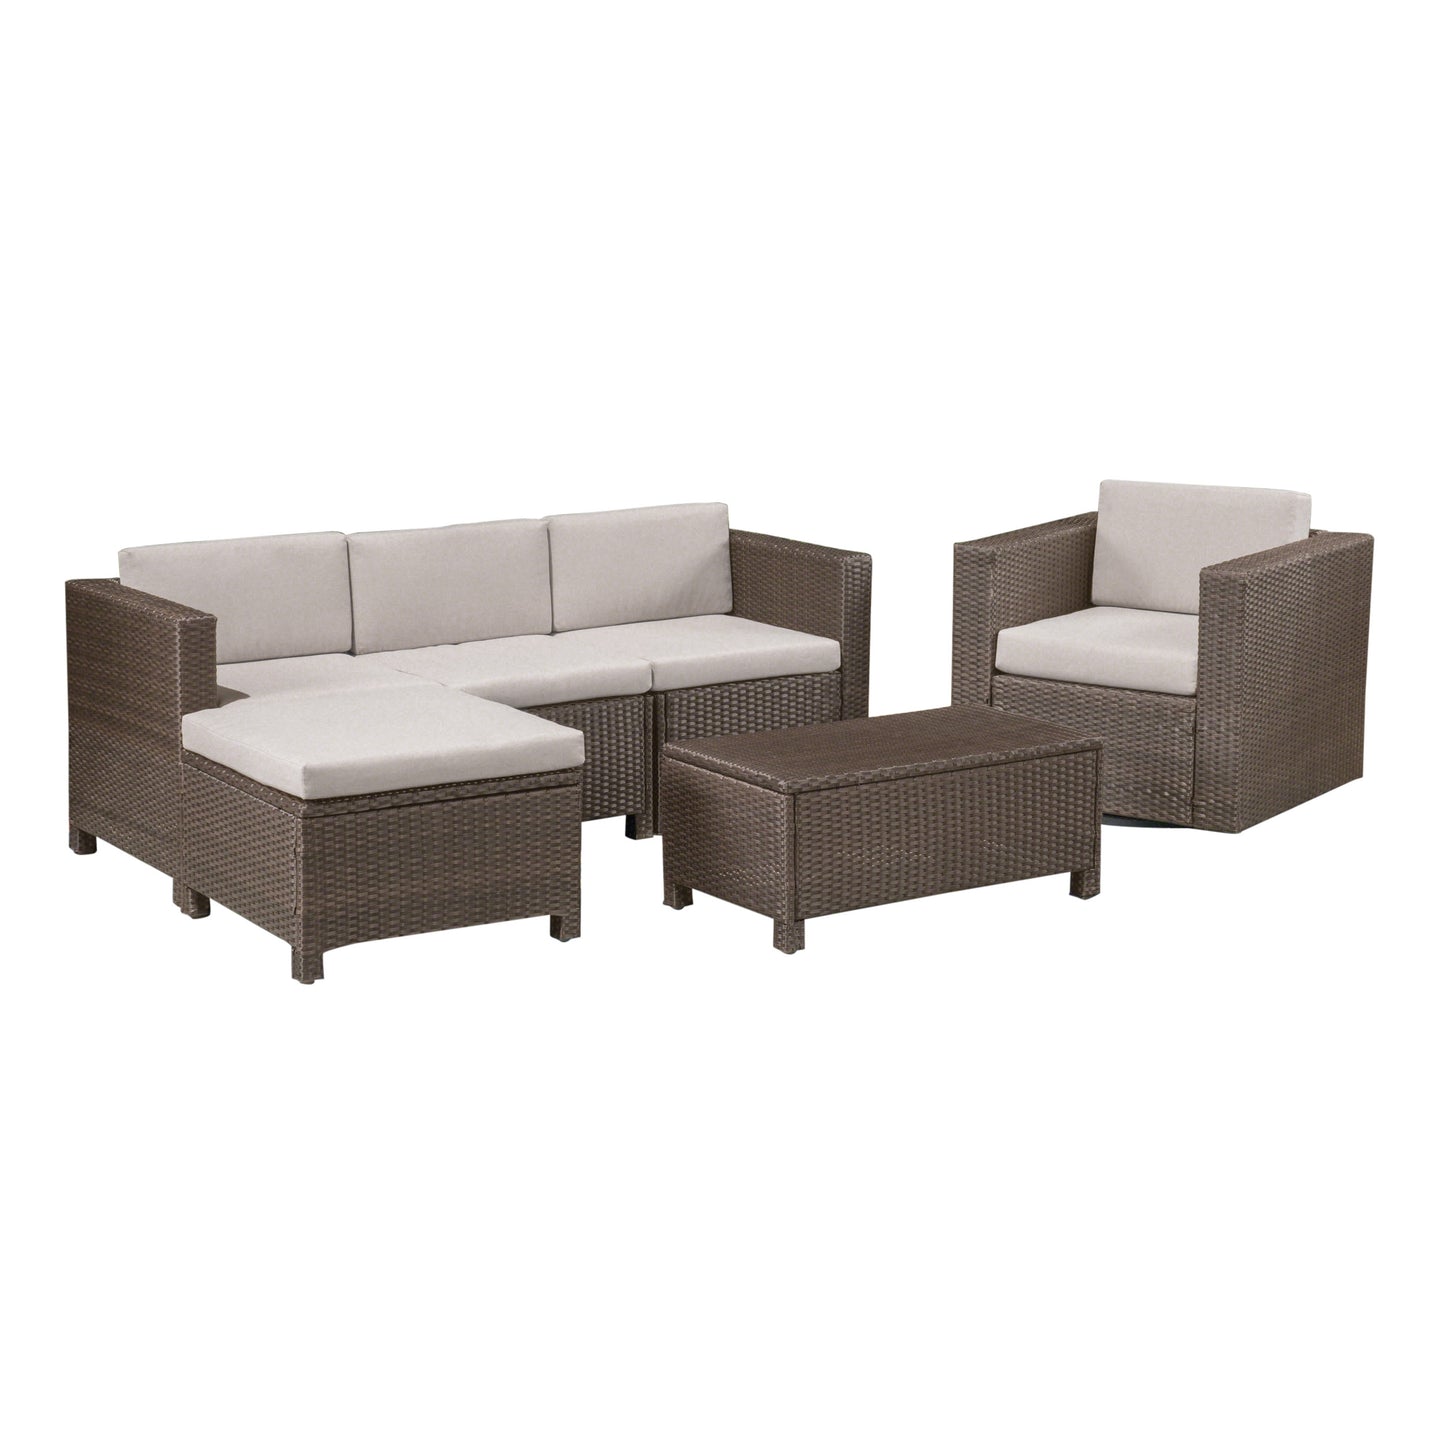 Tanner Outdoor 4 Seater Wicker L-Shaped Sectional Sofa Set with Cushions